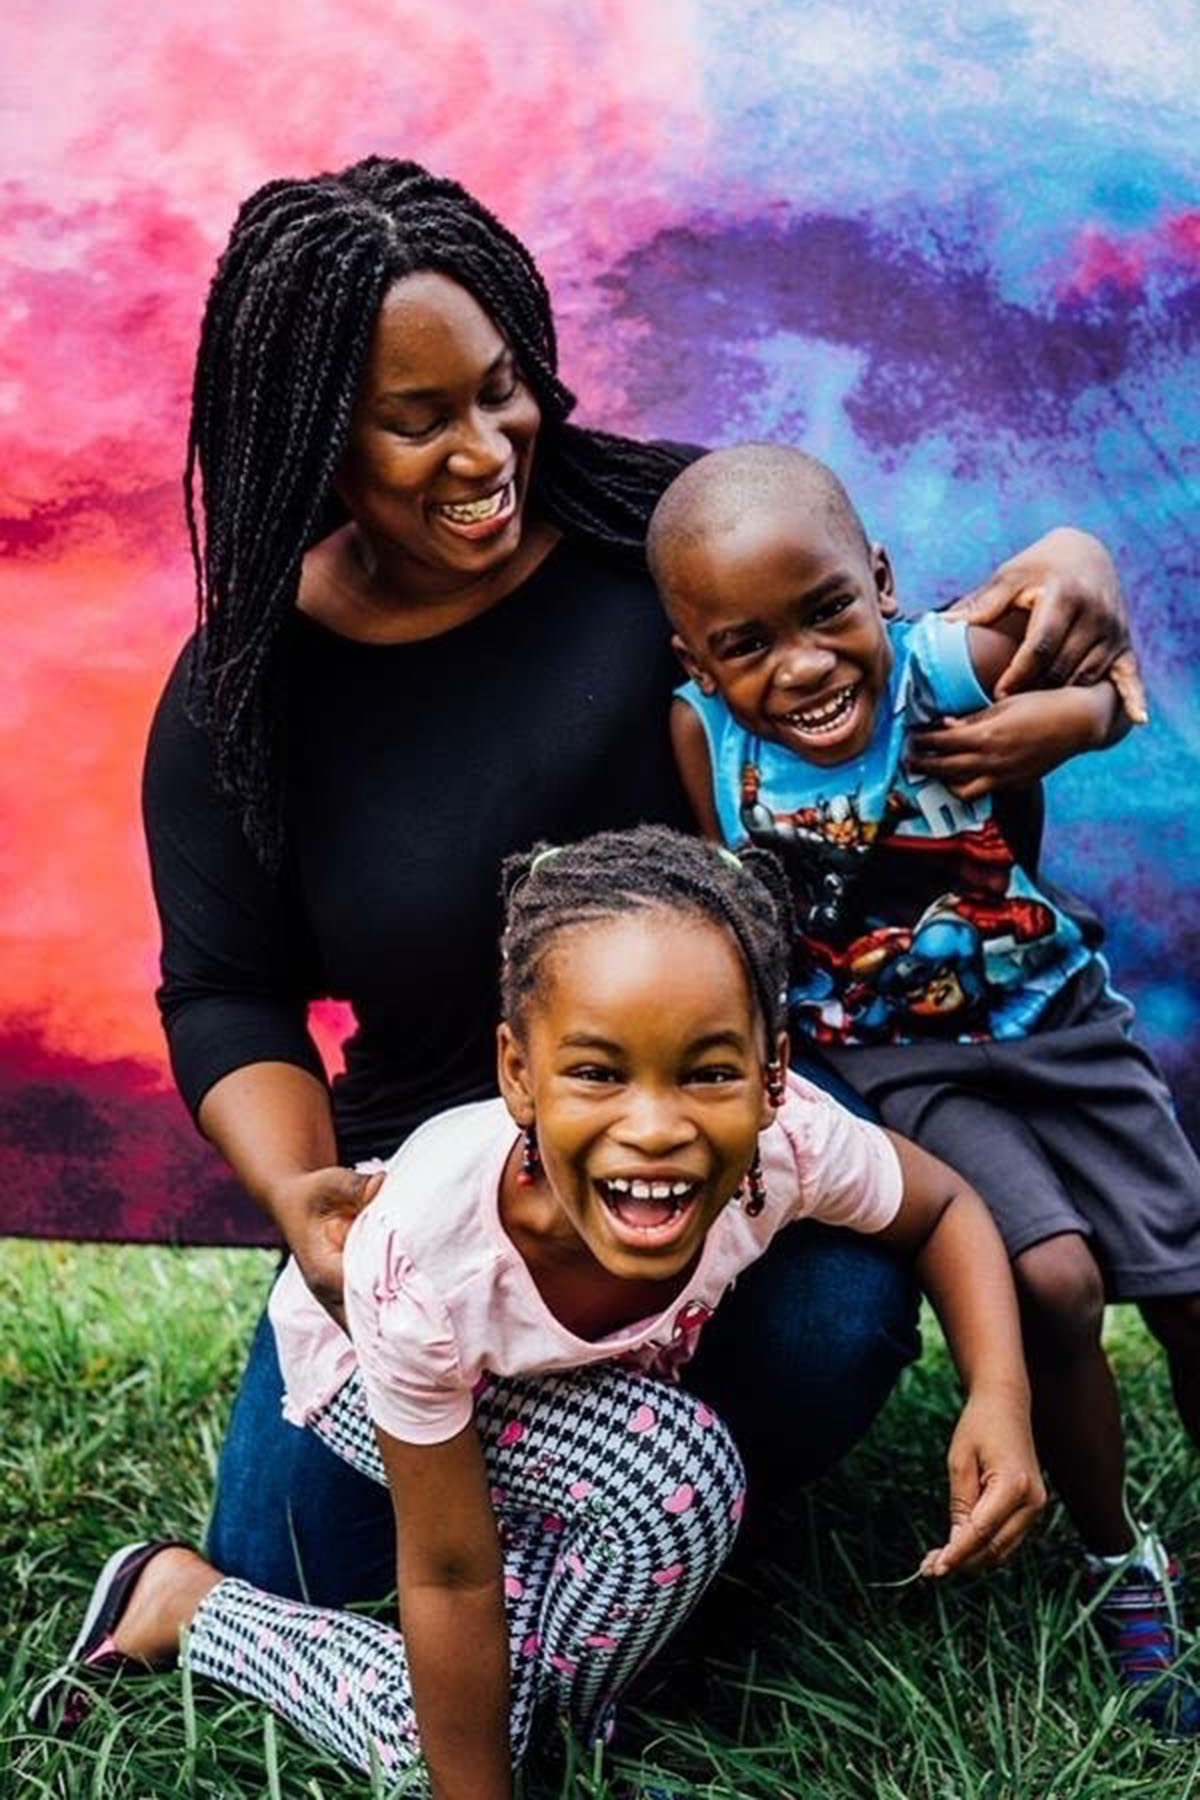 Dr. Onaiwu poses with her two youngest children during a family photoshoot.